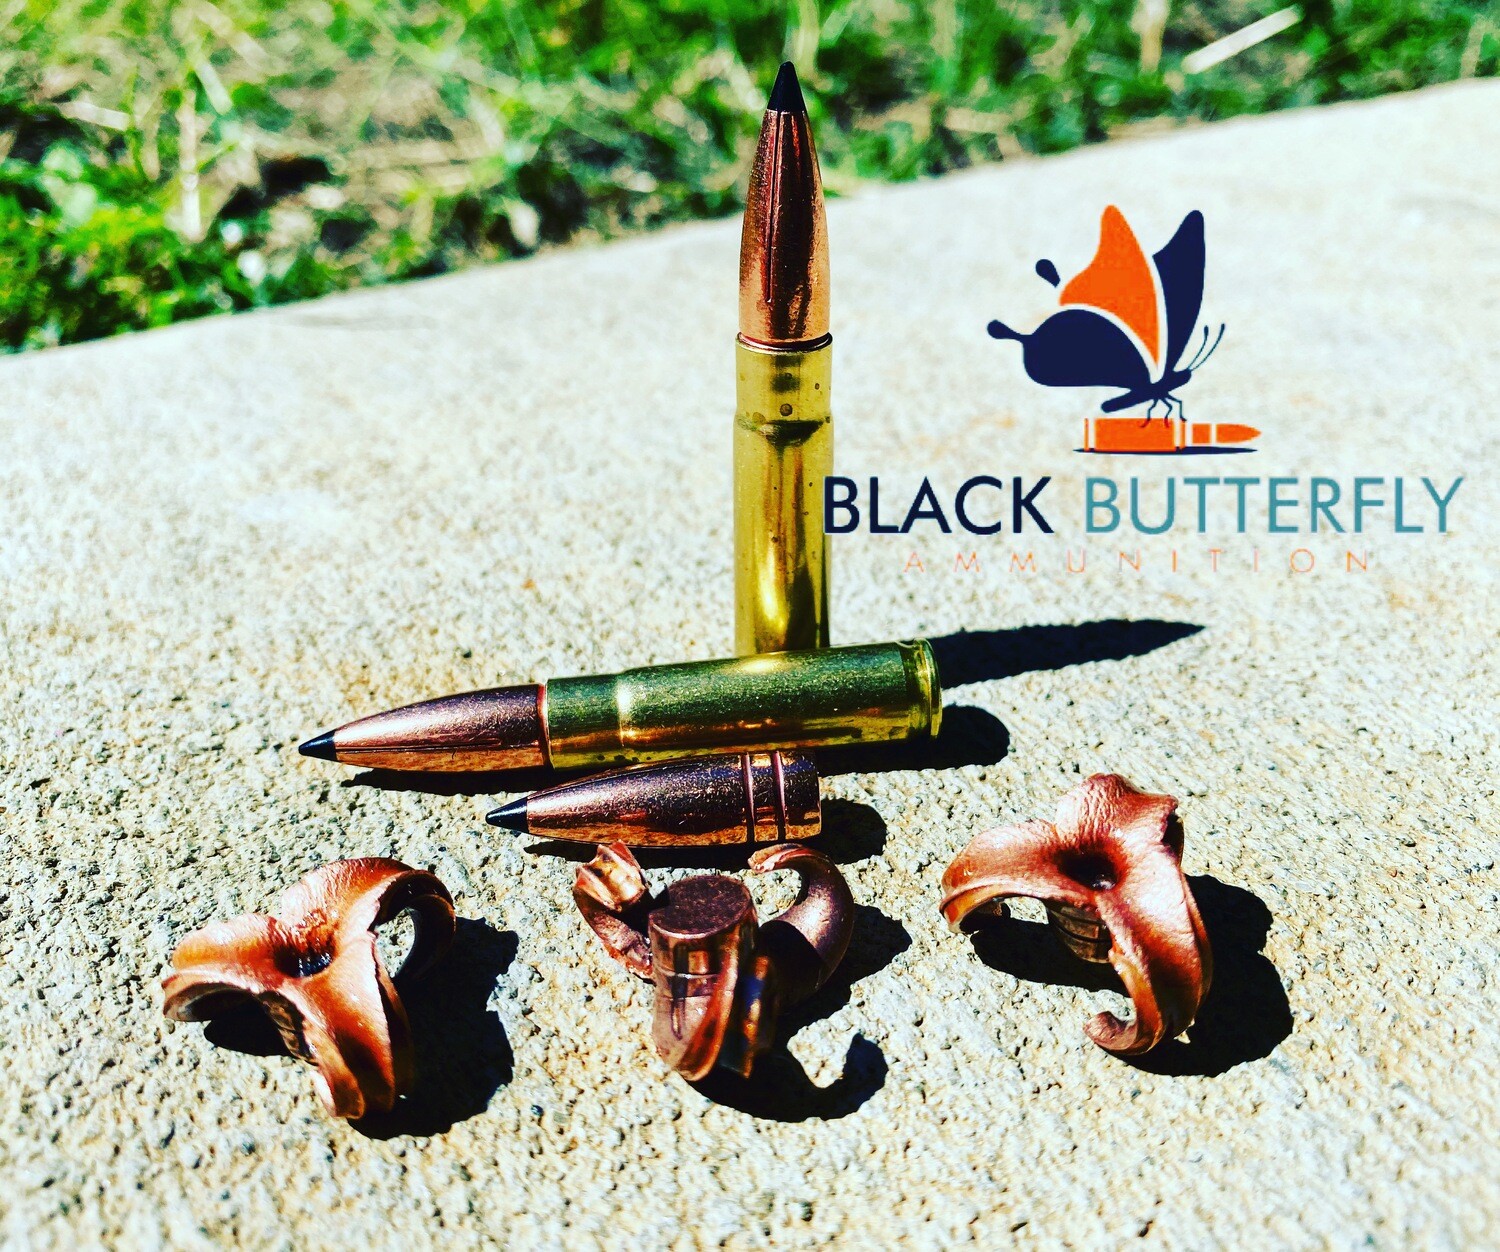 Black Butterfly Ammunition Premium, .300 AAC Blackout, 110 gr, 10 Rounds, Maker Expanding Copper &quot;BOAR TOOTH&quot; (SAMPLE PACK)